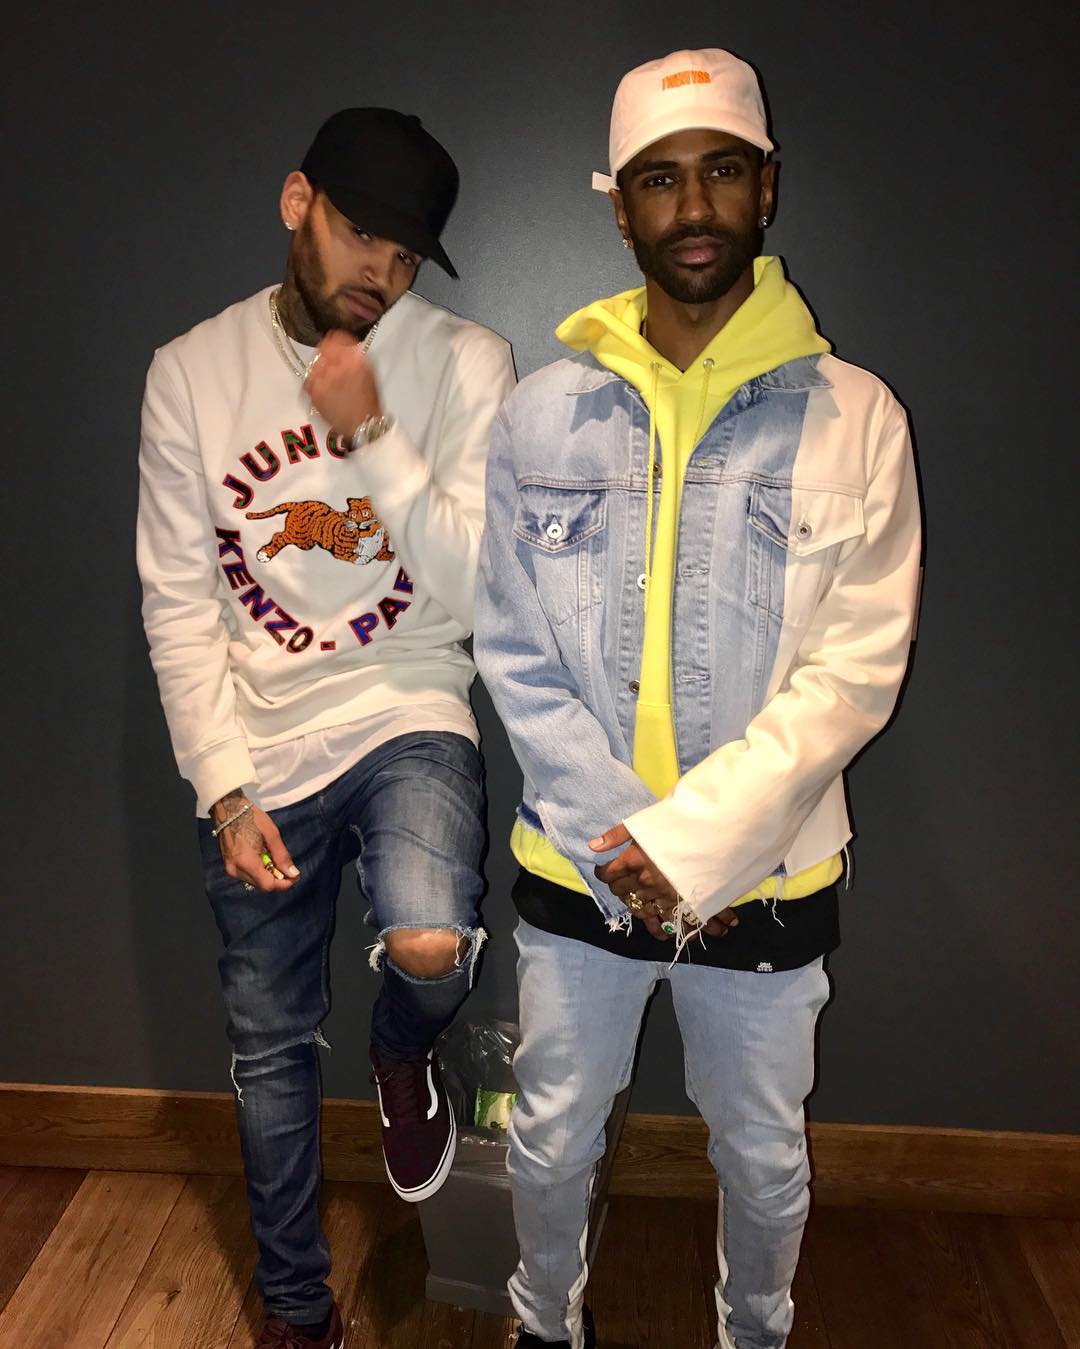 SPOTTED: Big Sean In OFF-WHITE x Levi’s + Chris Brown In Kenzo x H&M